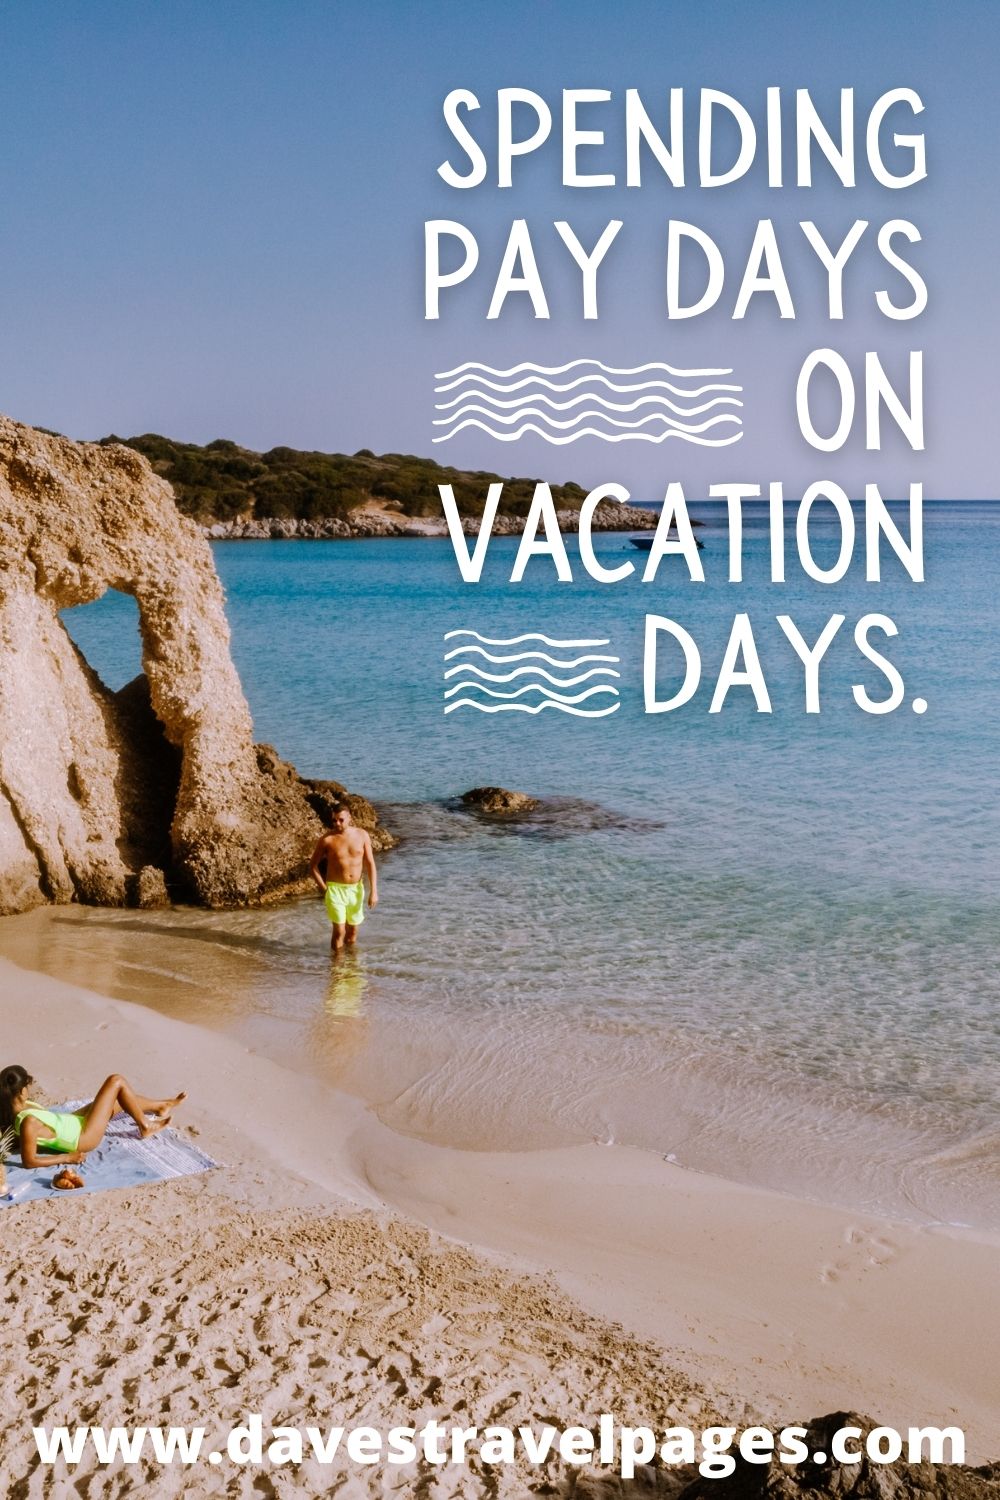 Spending pay days on vacation days Instagram caption